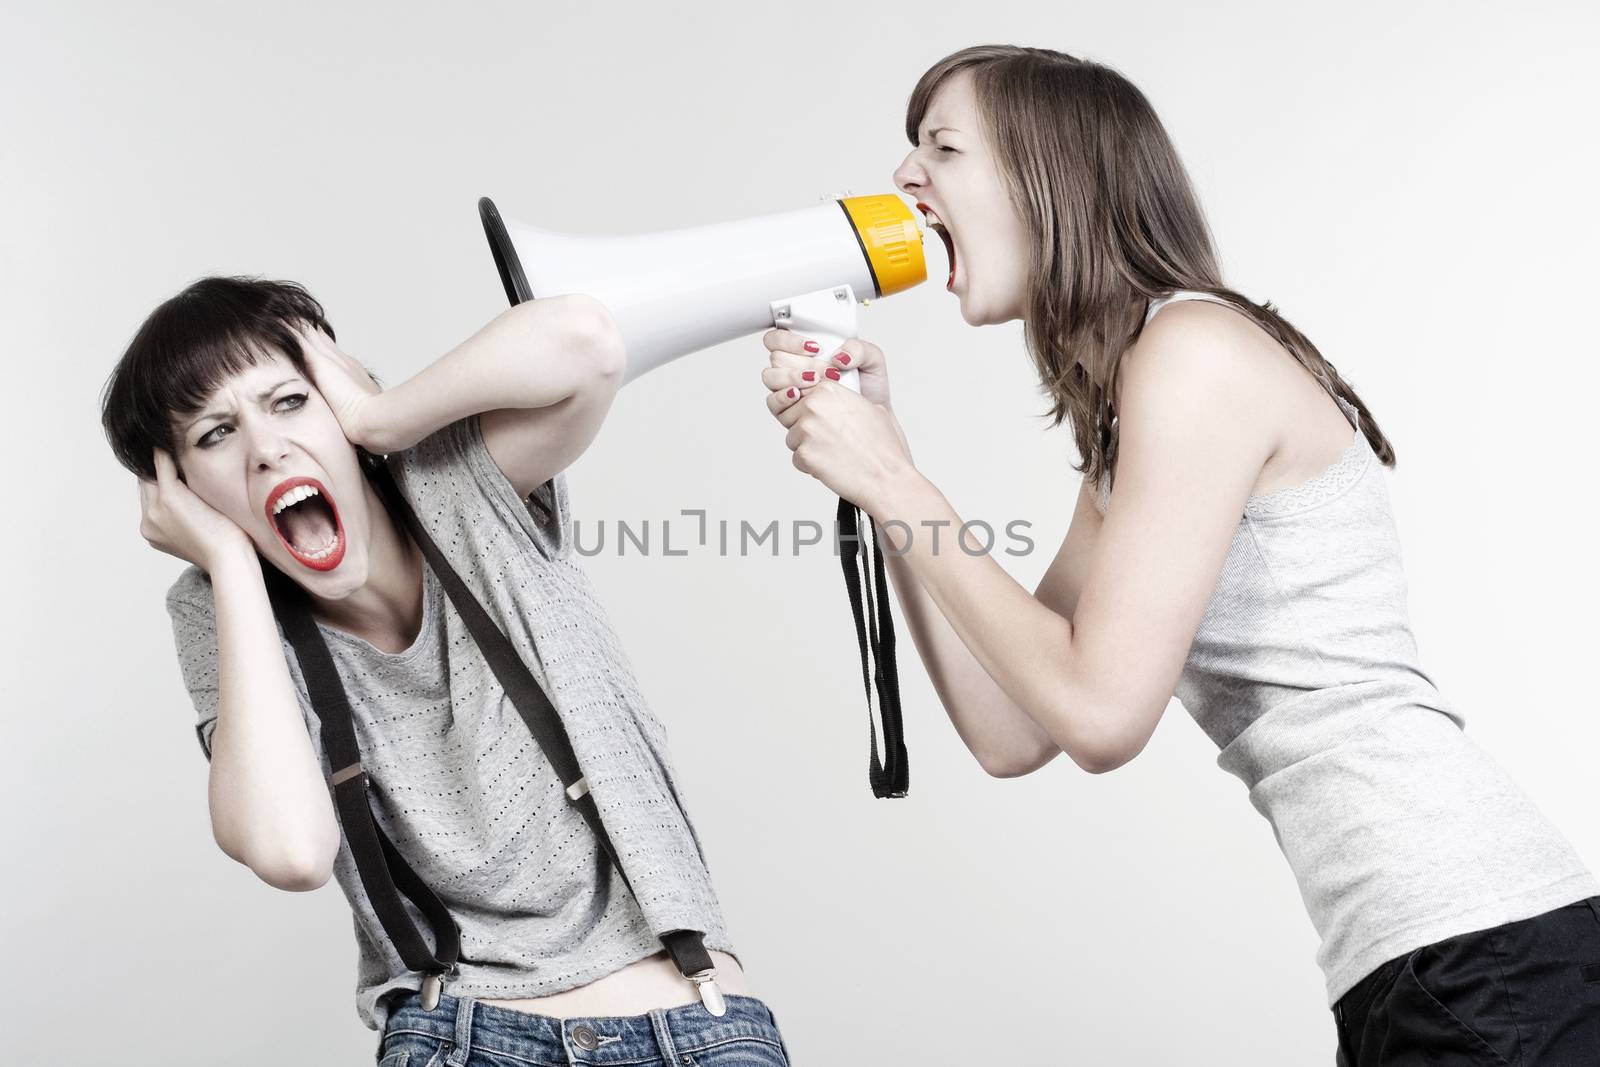 girls with a megaphone by courtyardpix